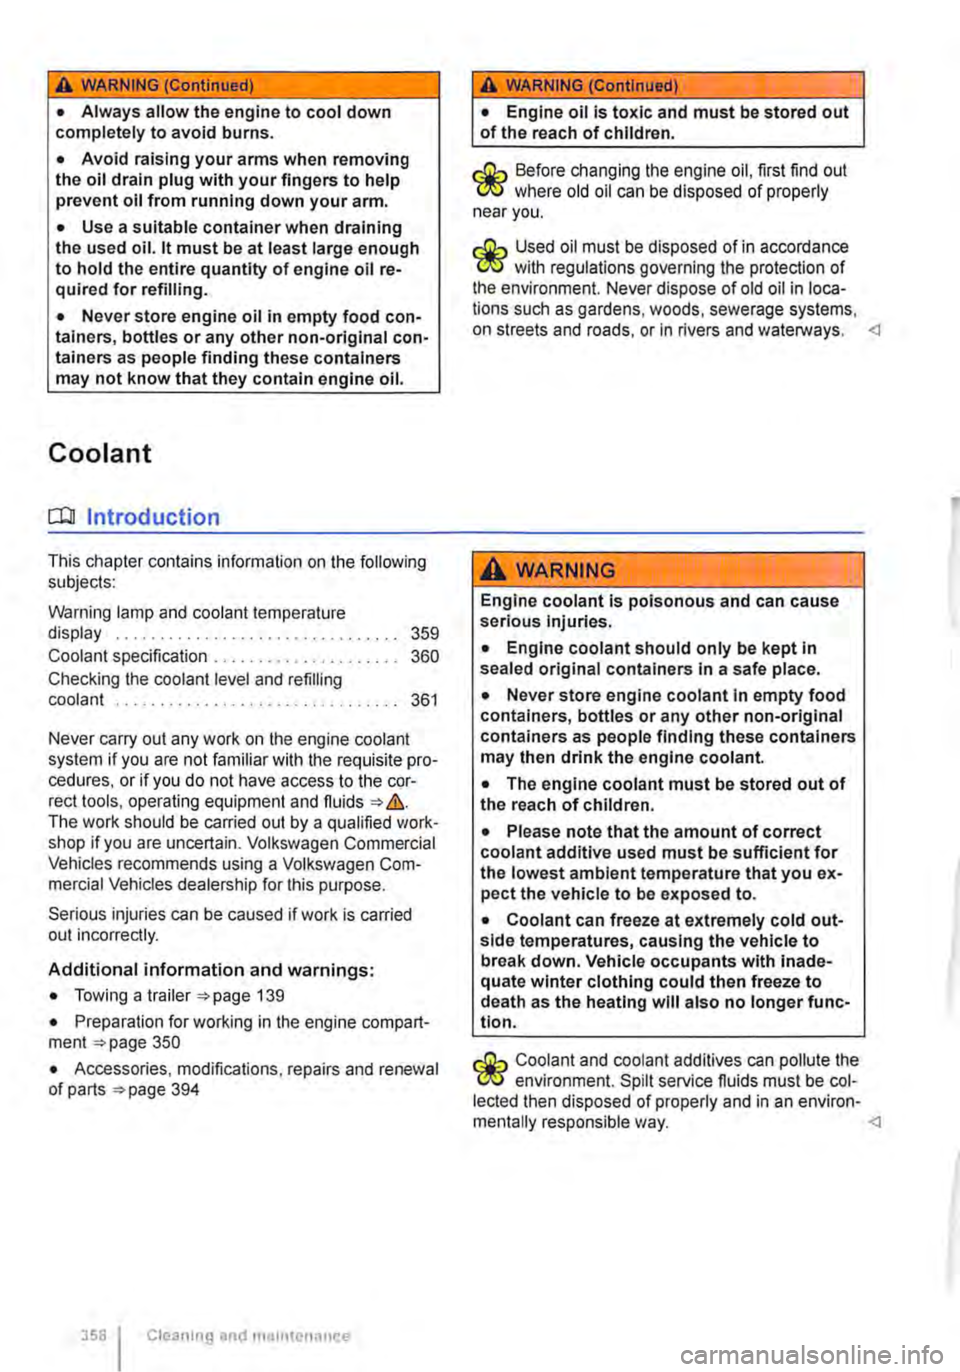 VOLKSWAGEN TRANSPORTER 2019  Owners Manual A WARNING (Continued) 
• Always allow the engine to cool down completely to avoid burns. 
• Avoid raising your arms when removing the oil drain plug with your fingers to help prevent oil from runn